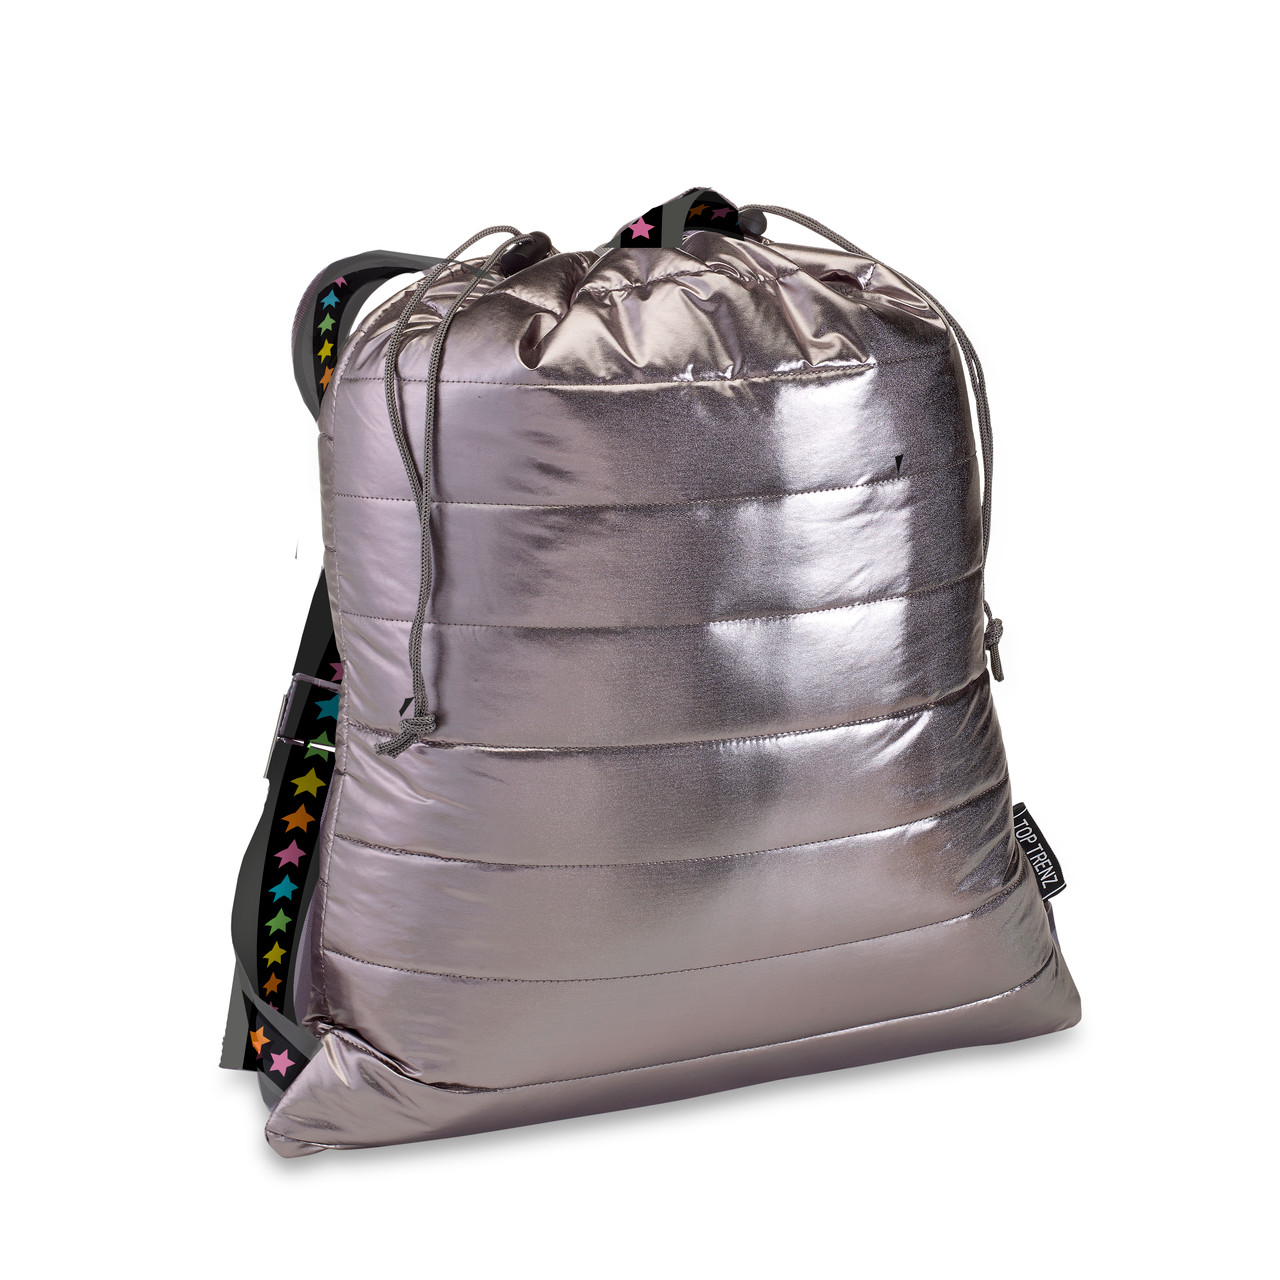 Hottest Selling Crossbody Puffer Bag For Kids And Tweens